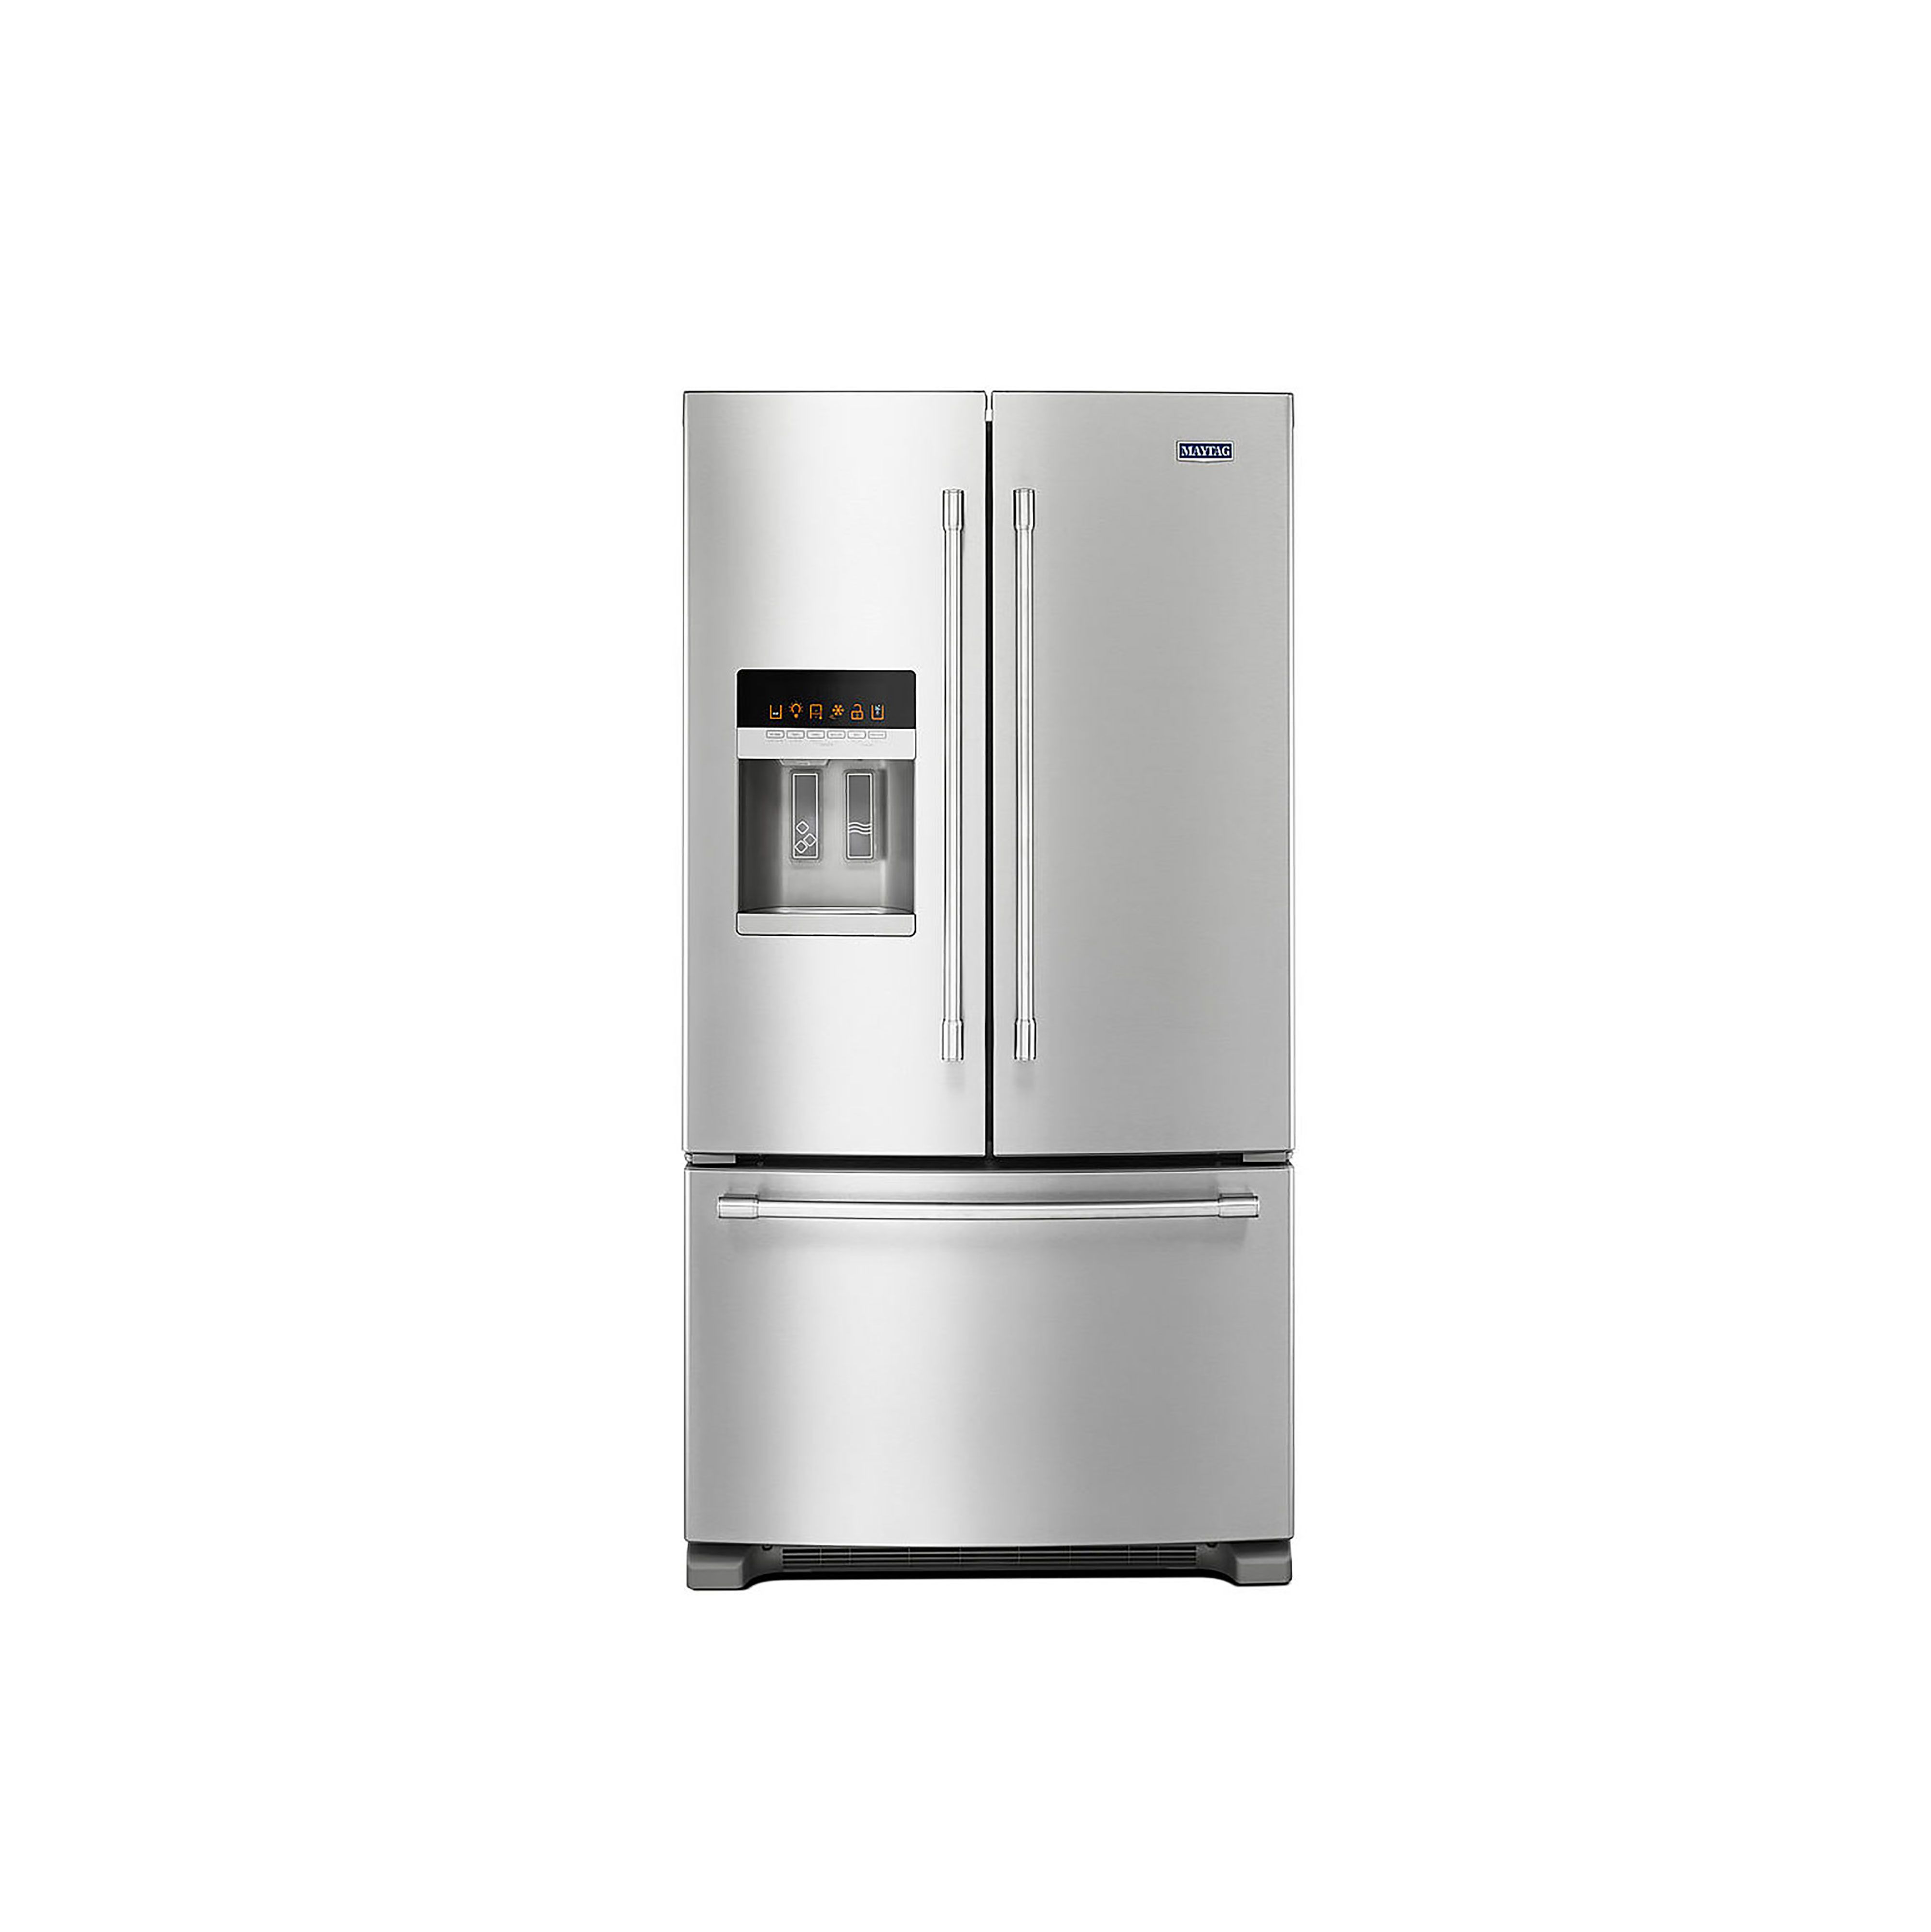 Maytag 36-Inch Wide French Door Refrigerator 25 Cu. Ft. MFI2570FEZ01 Review, Price and Features – Pros and Cons of Maytag 36-Inch Wide French Door Refrigerator 25 Cu. Ft. MFI2570FEZ01